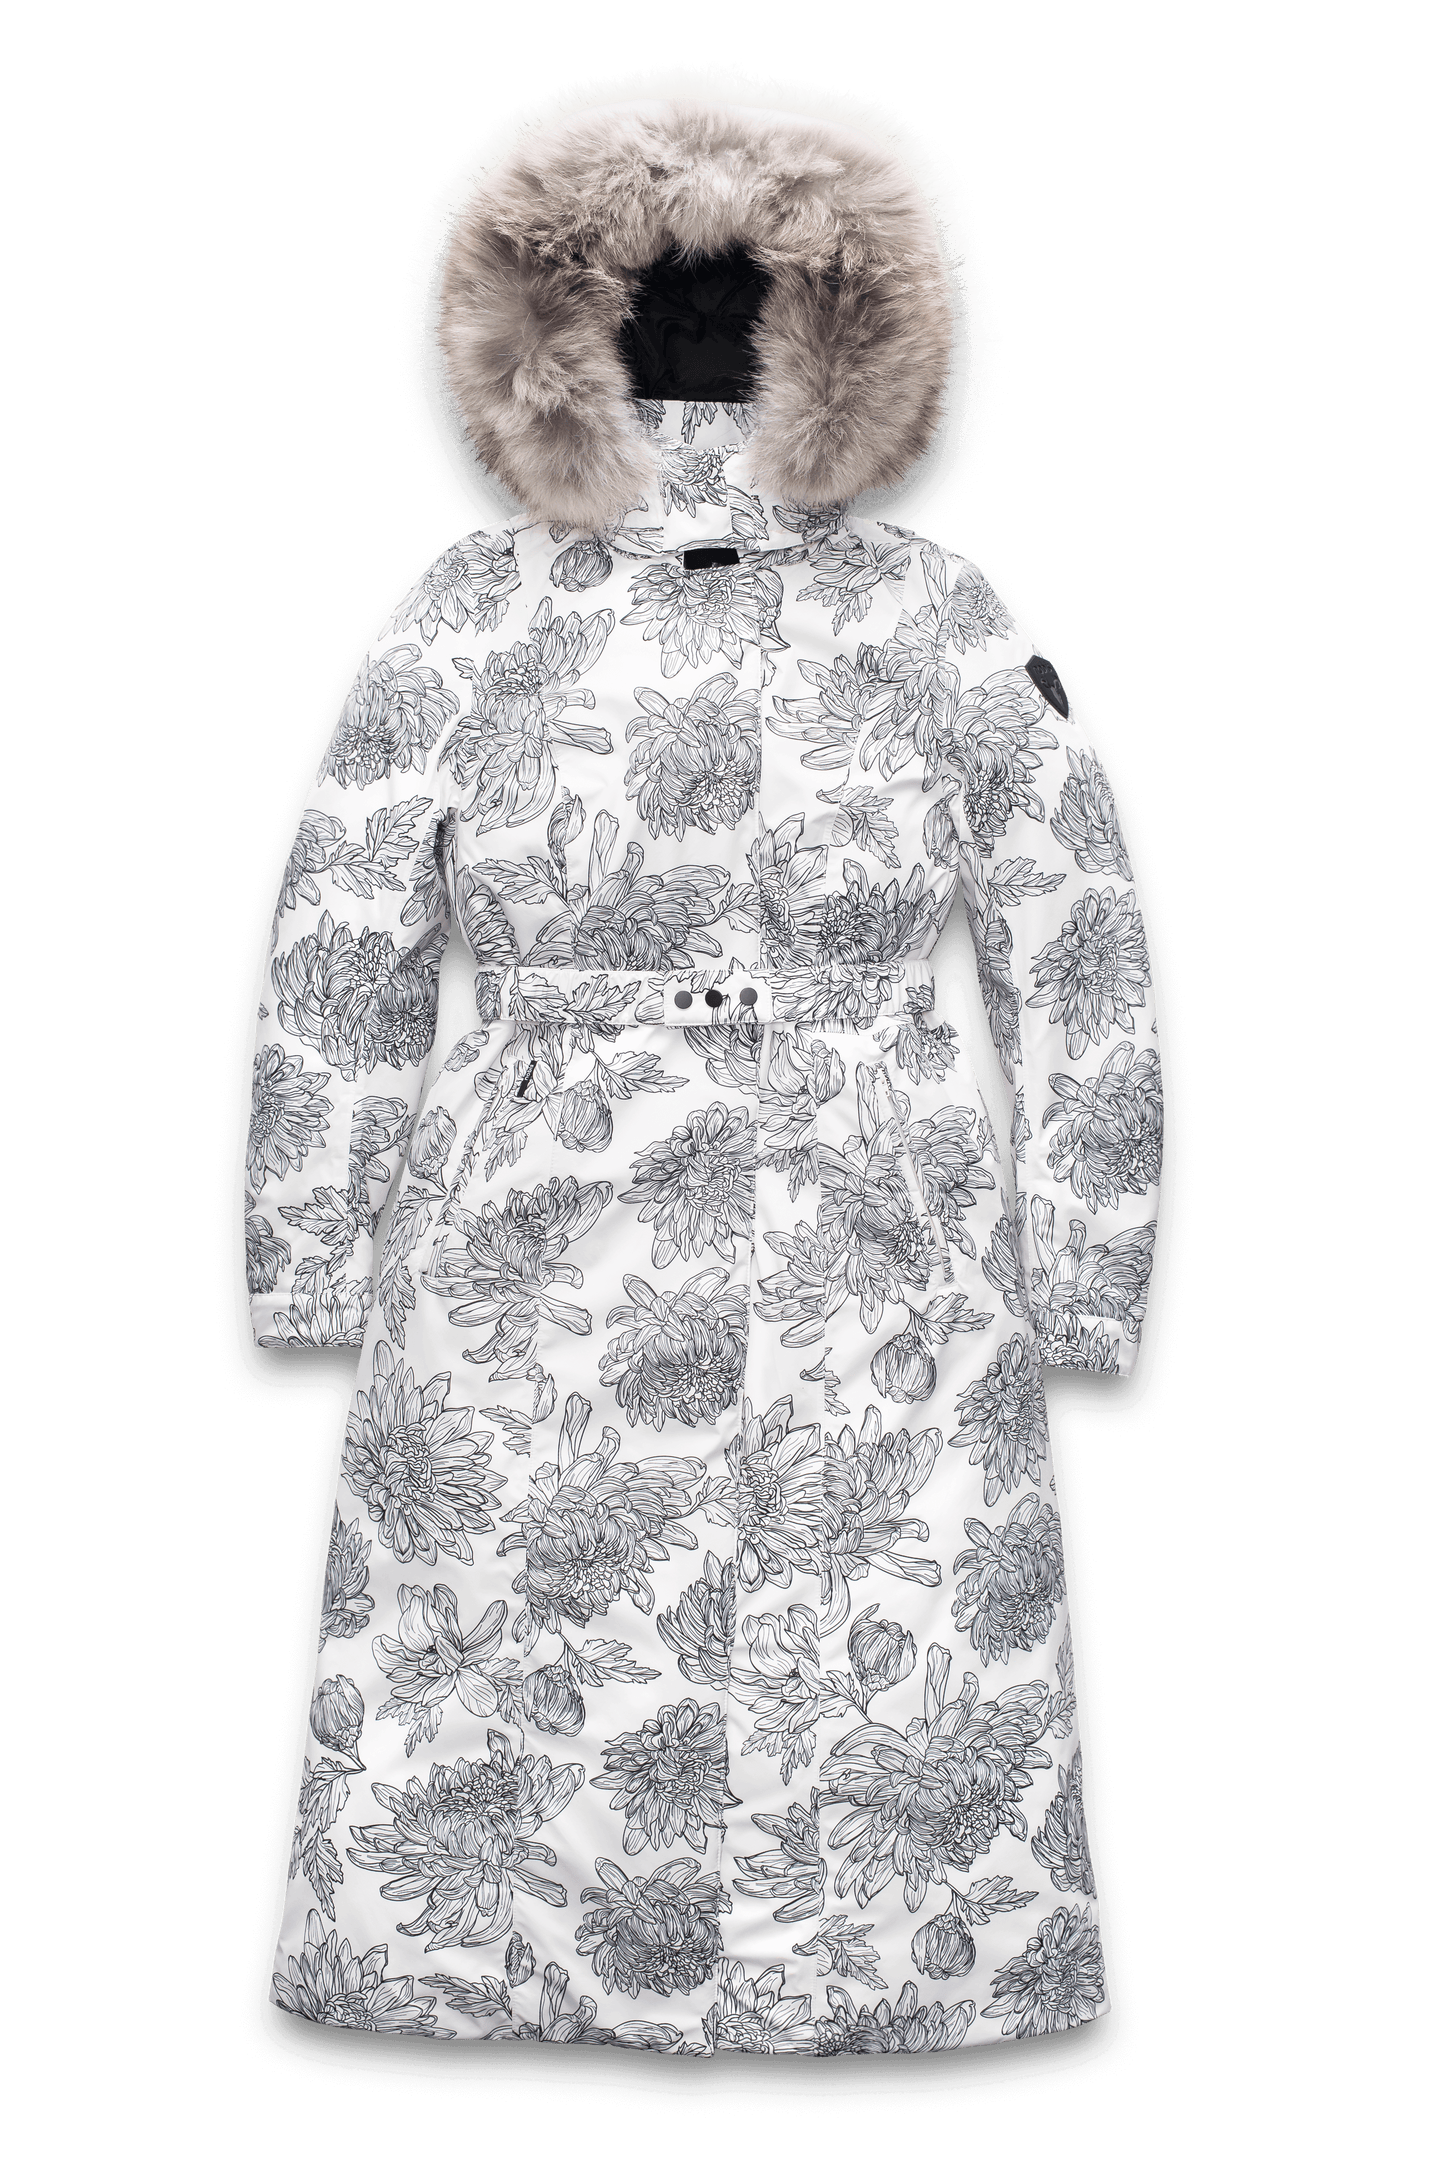 Celest Ladies Duster Parka in knee length, Canadian duck down insulation, removable hood and coyote fur trim, with adjustable belt, in White Floral